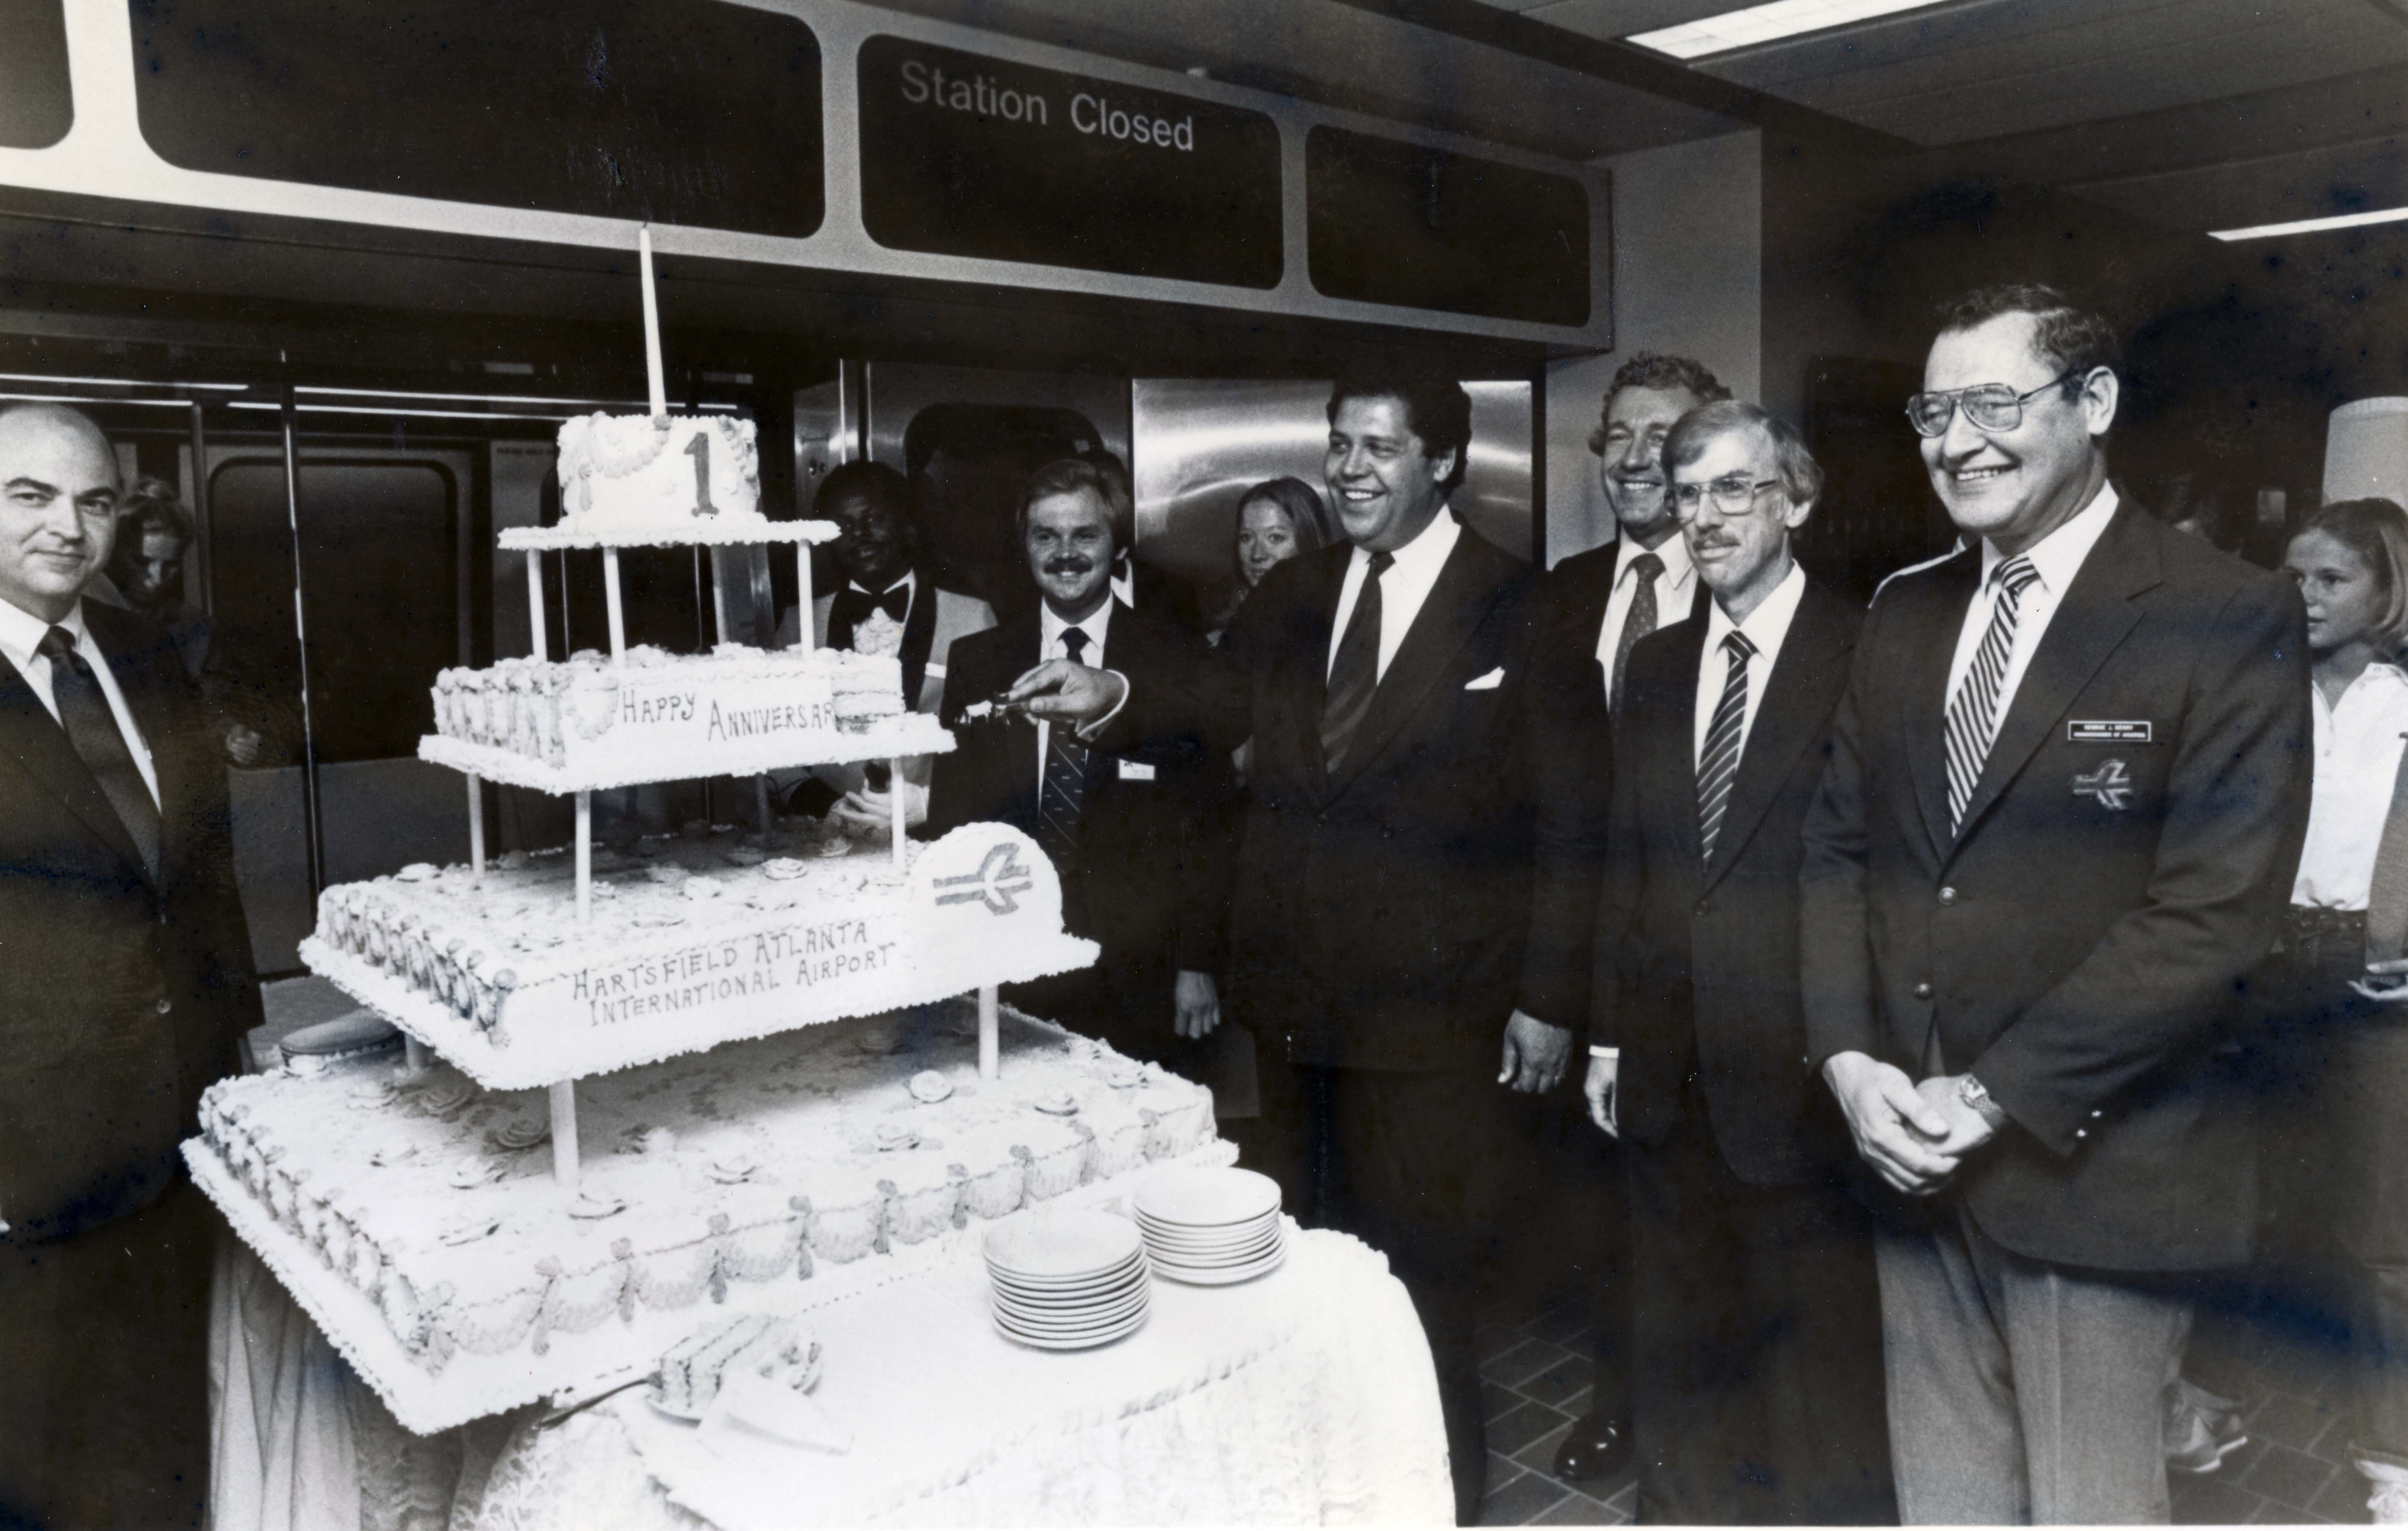 Berry with Jackson and other unidentified men, ca. 1981